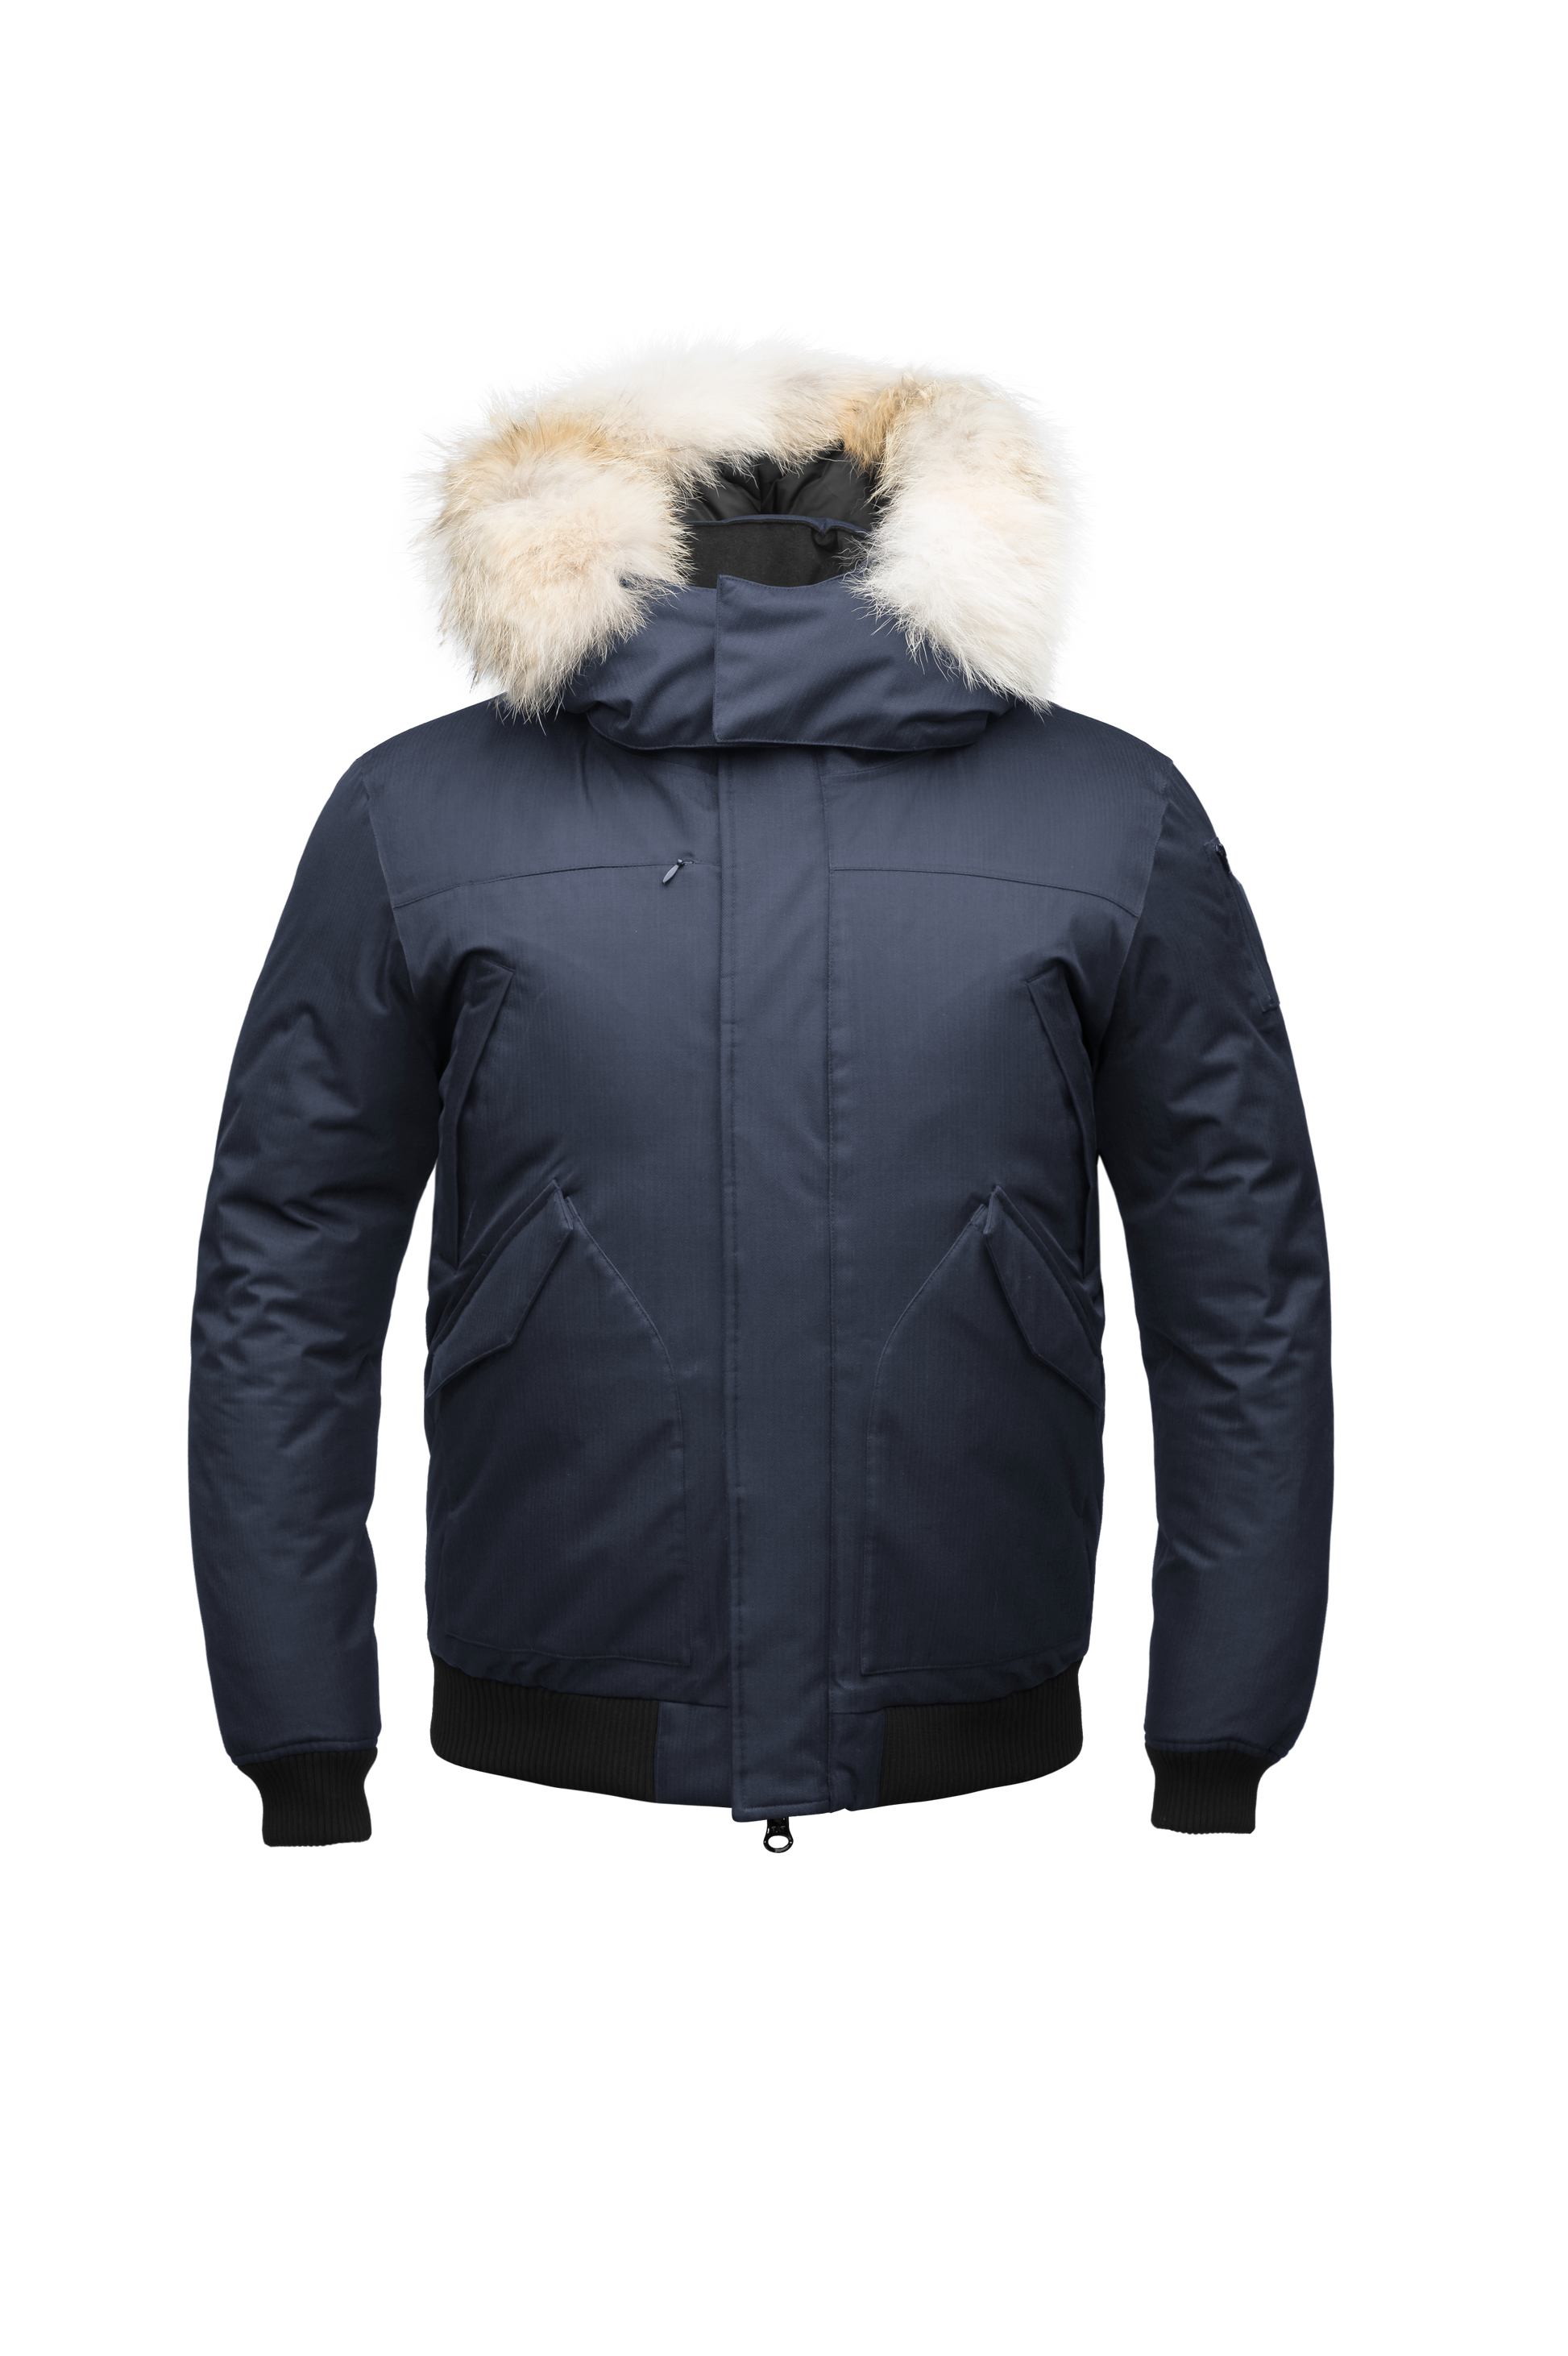 Men's classic down filled bomber jacket with a down filled hood that features a removable coyote fur trim and concealed moldable framing wire in Navy